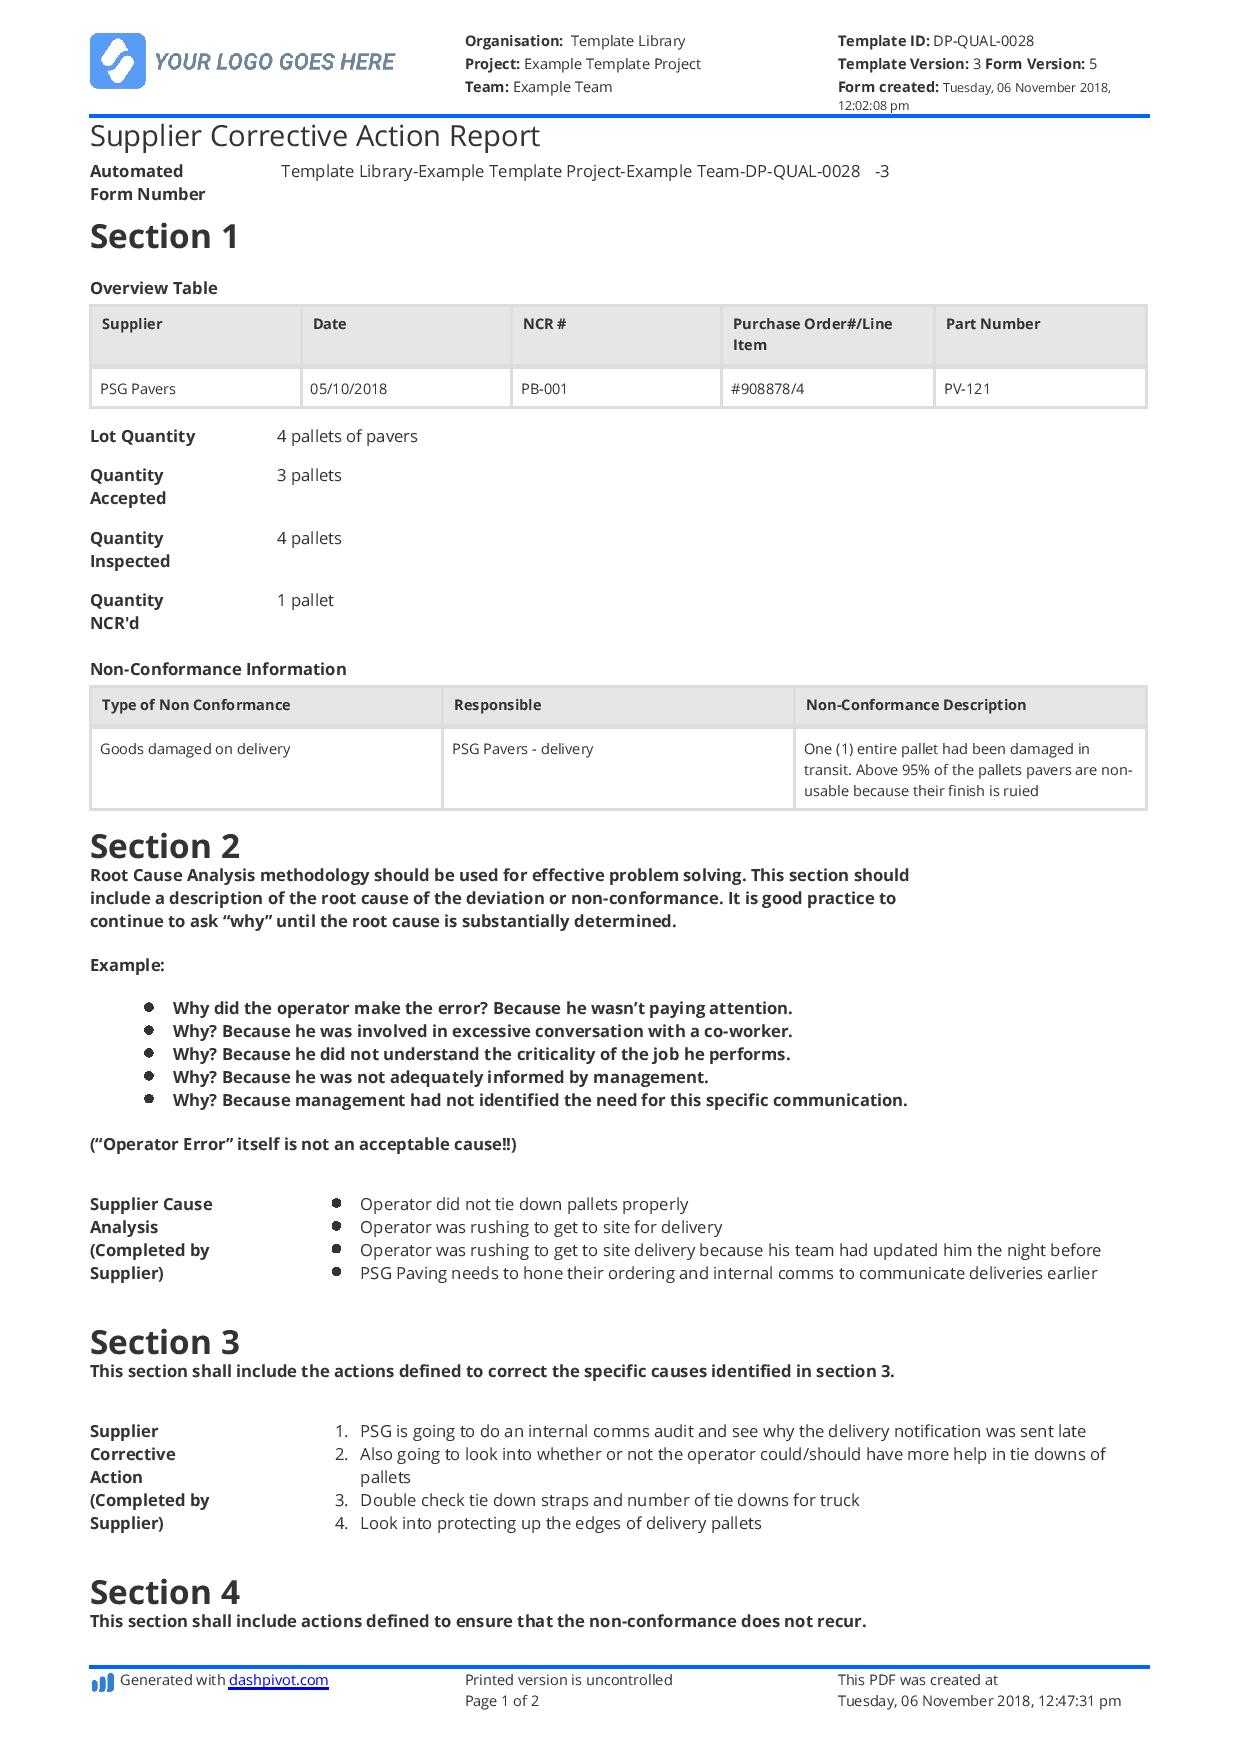 Supplier Corrective Action Report Template: Improve Your Pertaining To Corrective Action Report Template